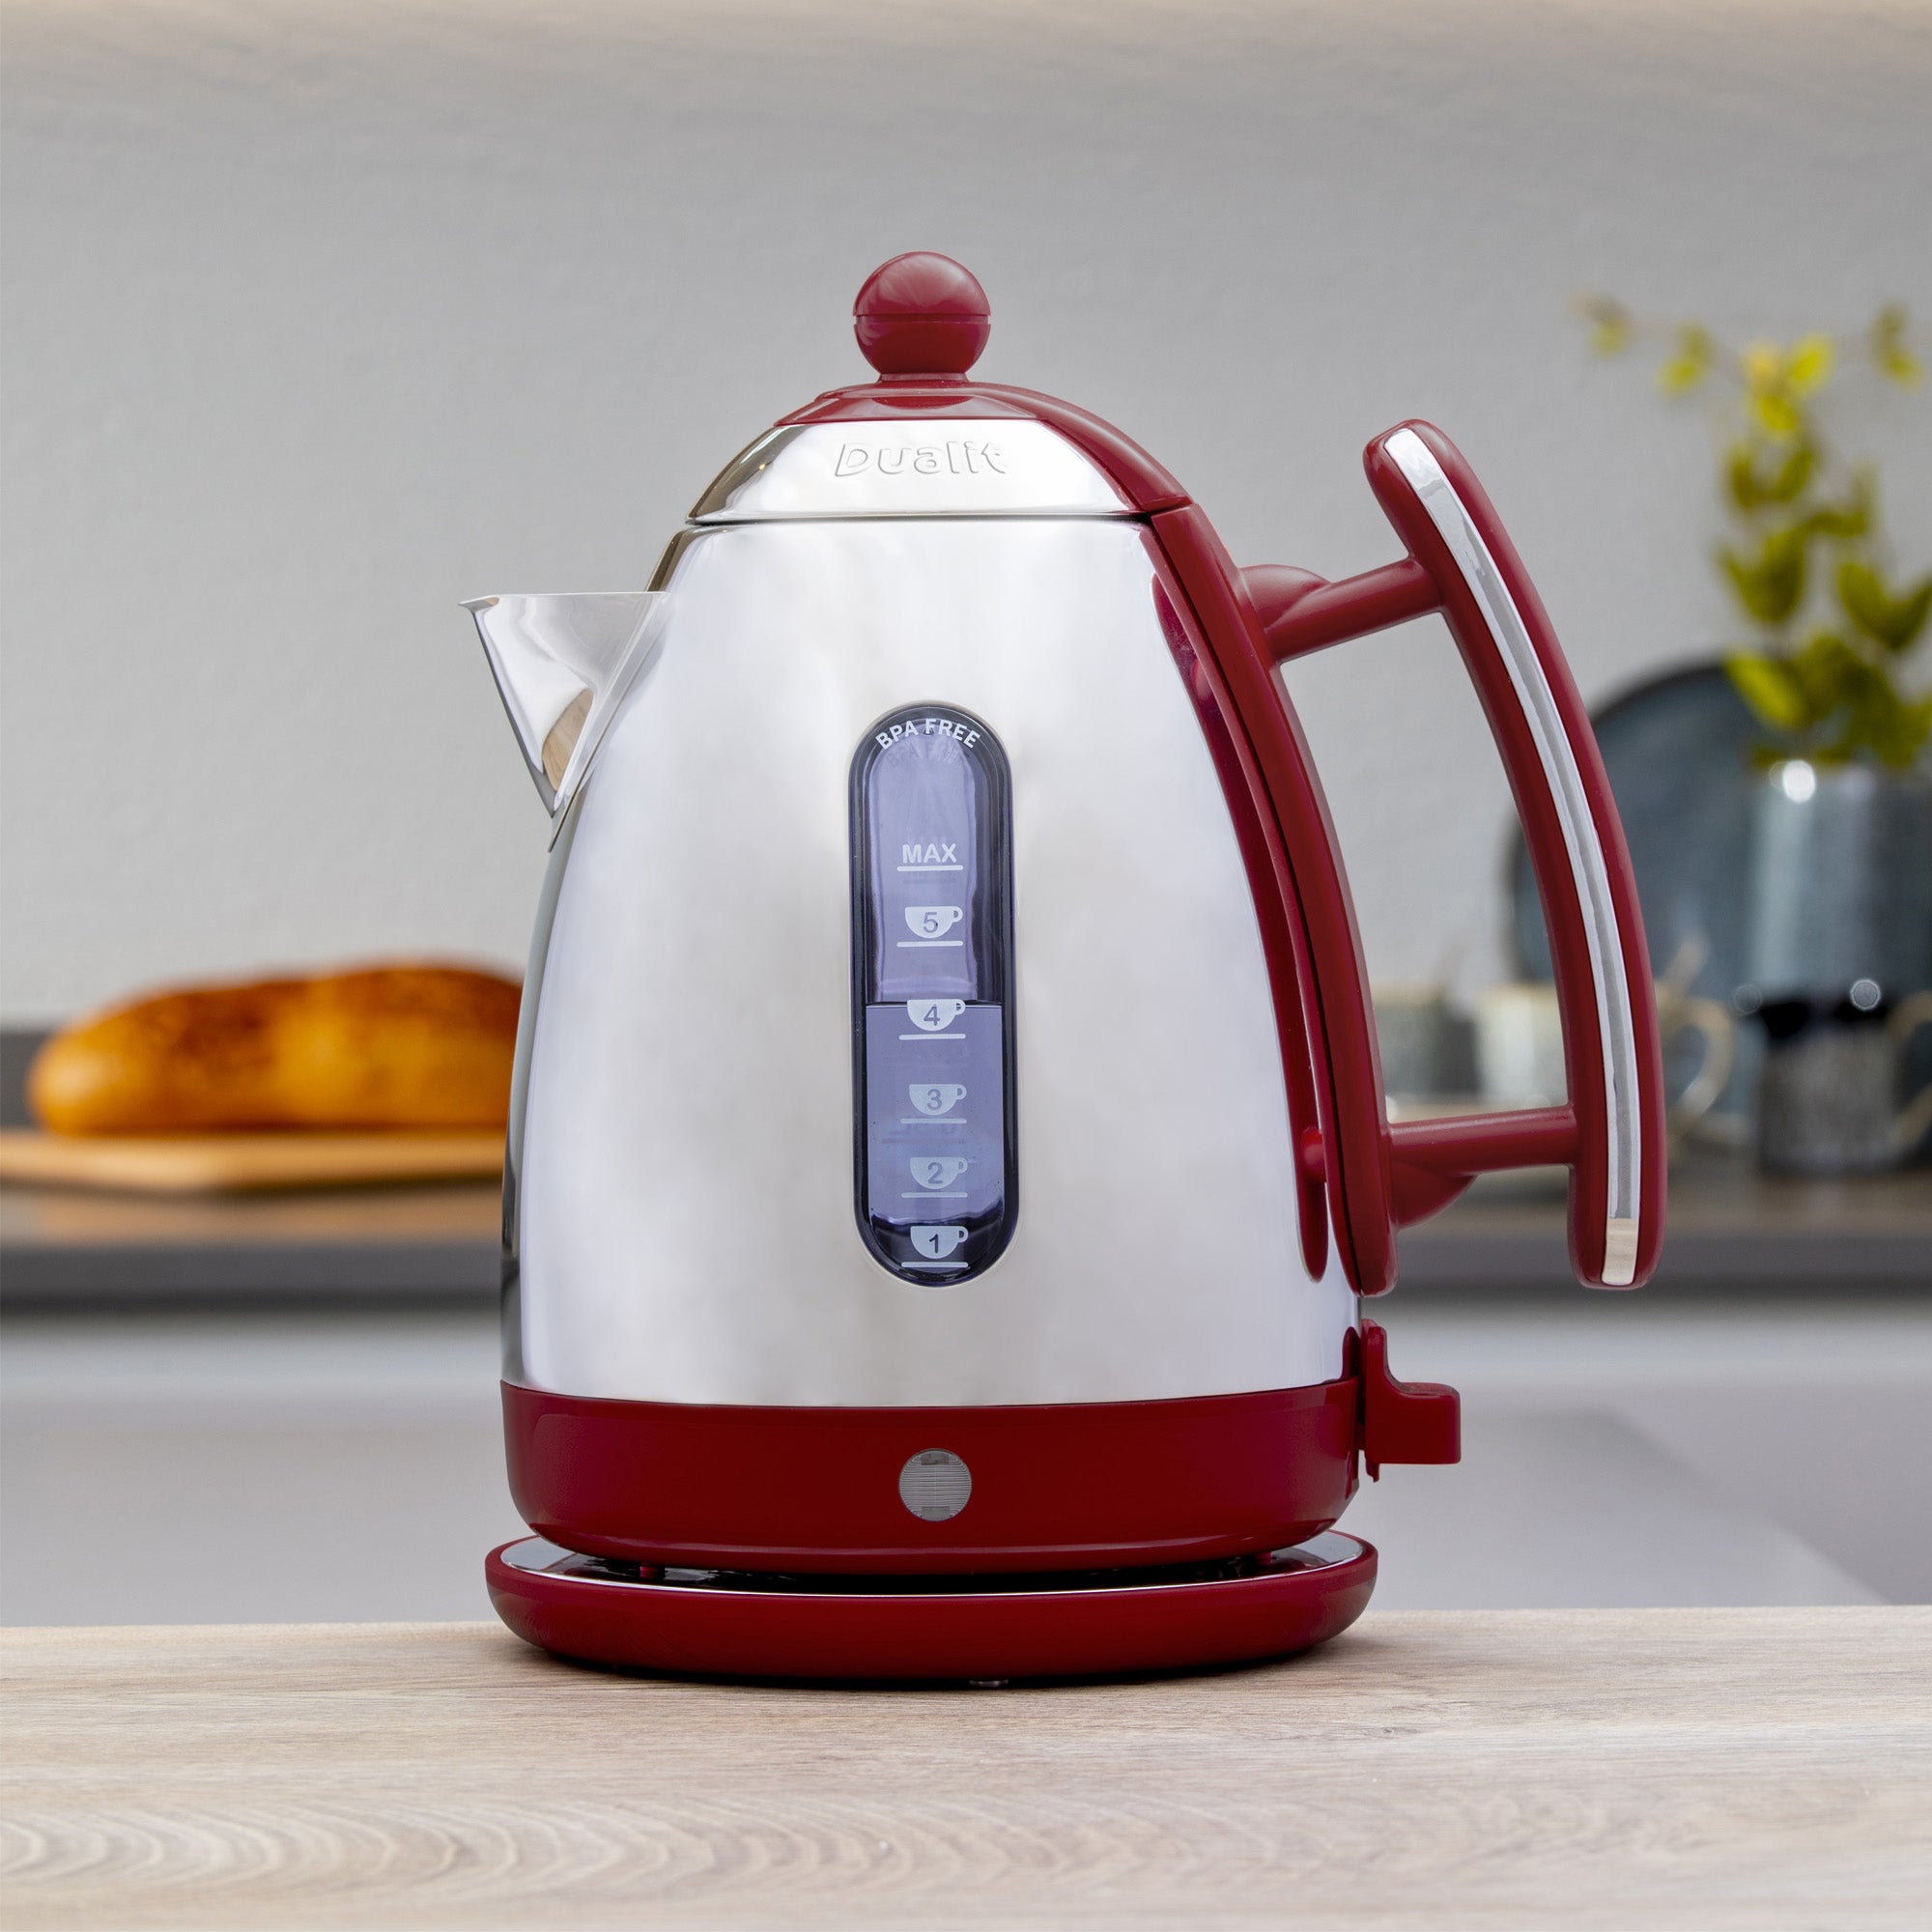 1.5 Litre Dualit Lite Kettle Price:135k As stylish as it is functional,  Dualit's Lite Kettle is an easy to use, upright kettle with a…